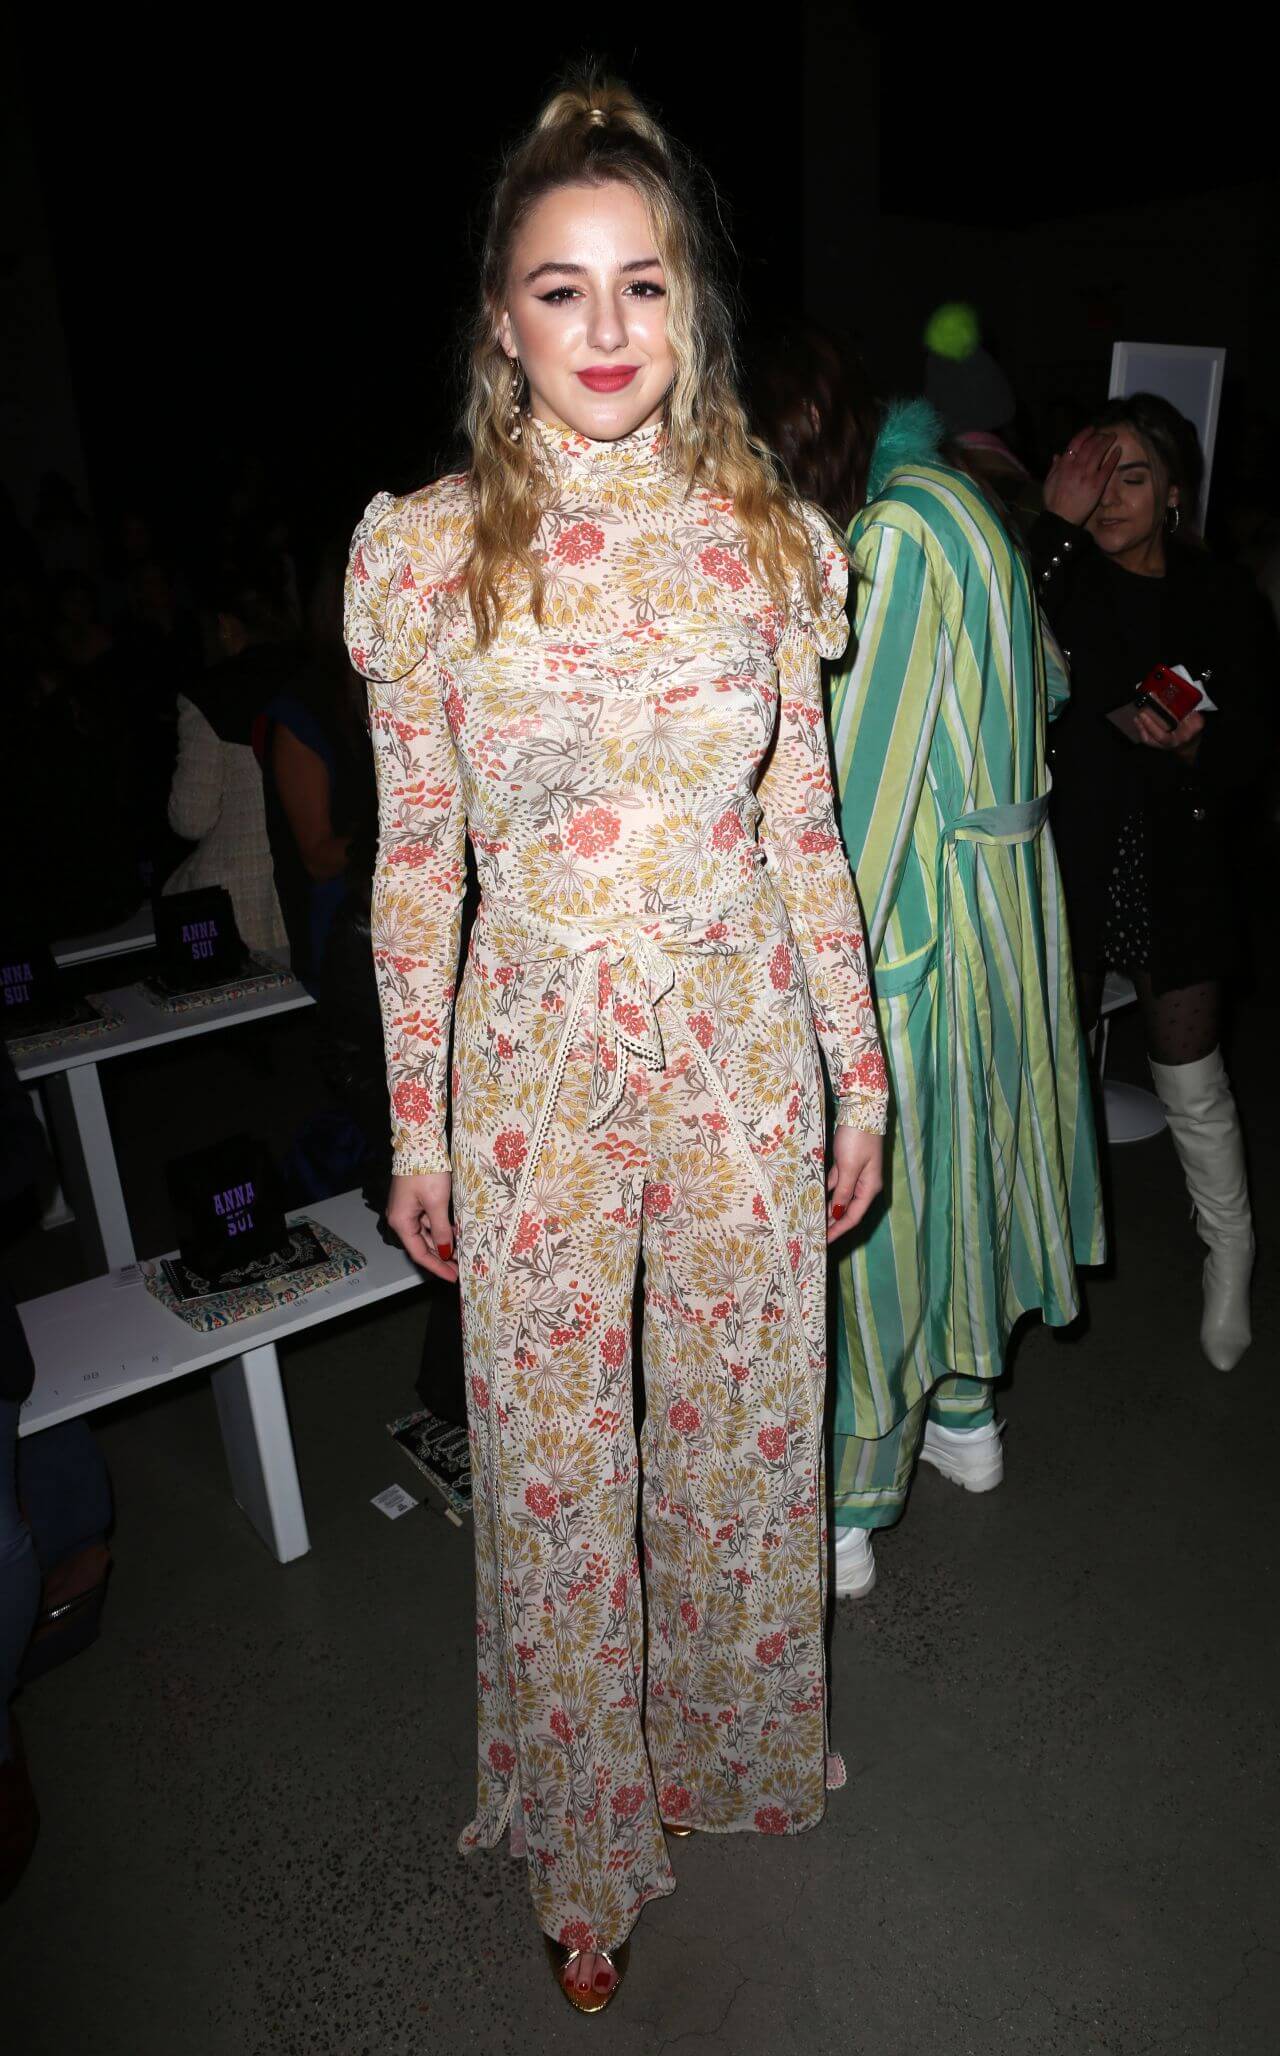 Chloe Lukasiak  In Floral Printed Full Sleeves Jumpsuit At Anna Sui Show at New York Fashion Week